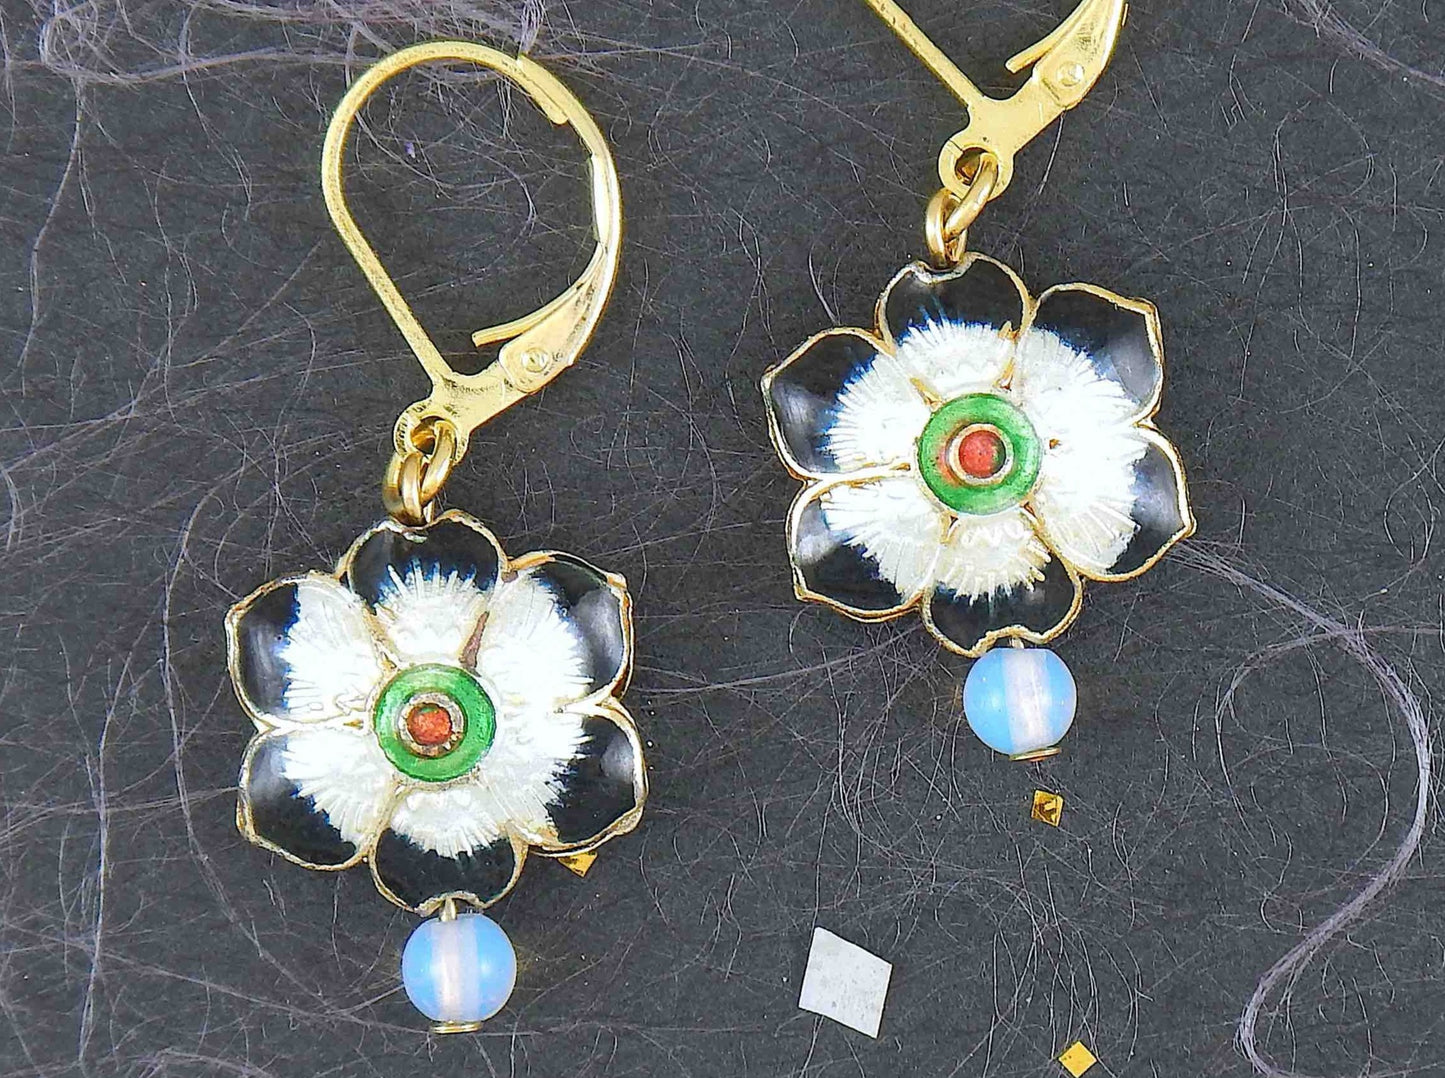 Short earrings with small enamelled flowers offered in 6 colours, synthetic moonstone (opalite), gold-toned stainless steel lever back hooks